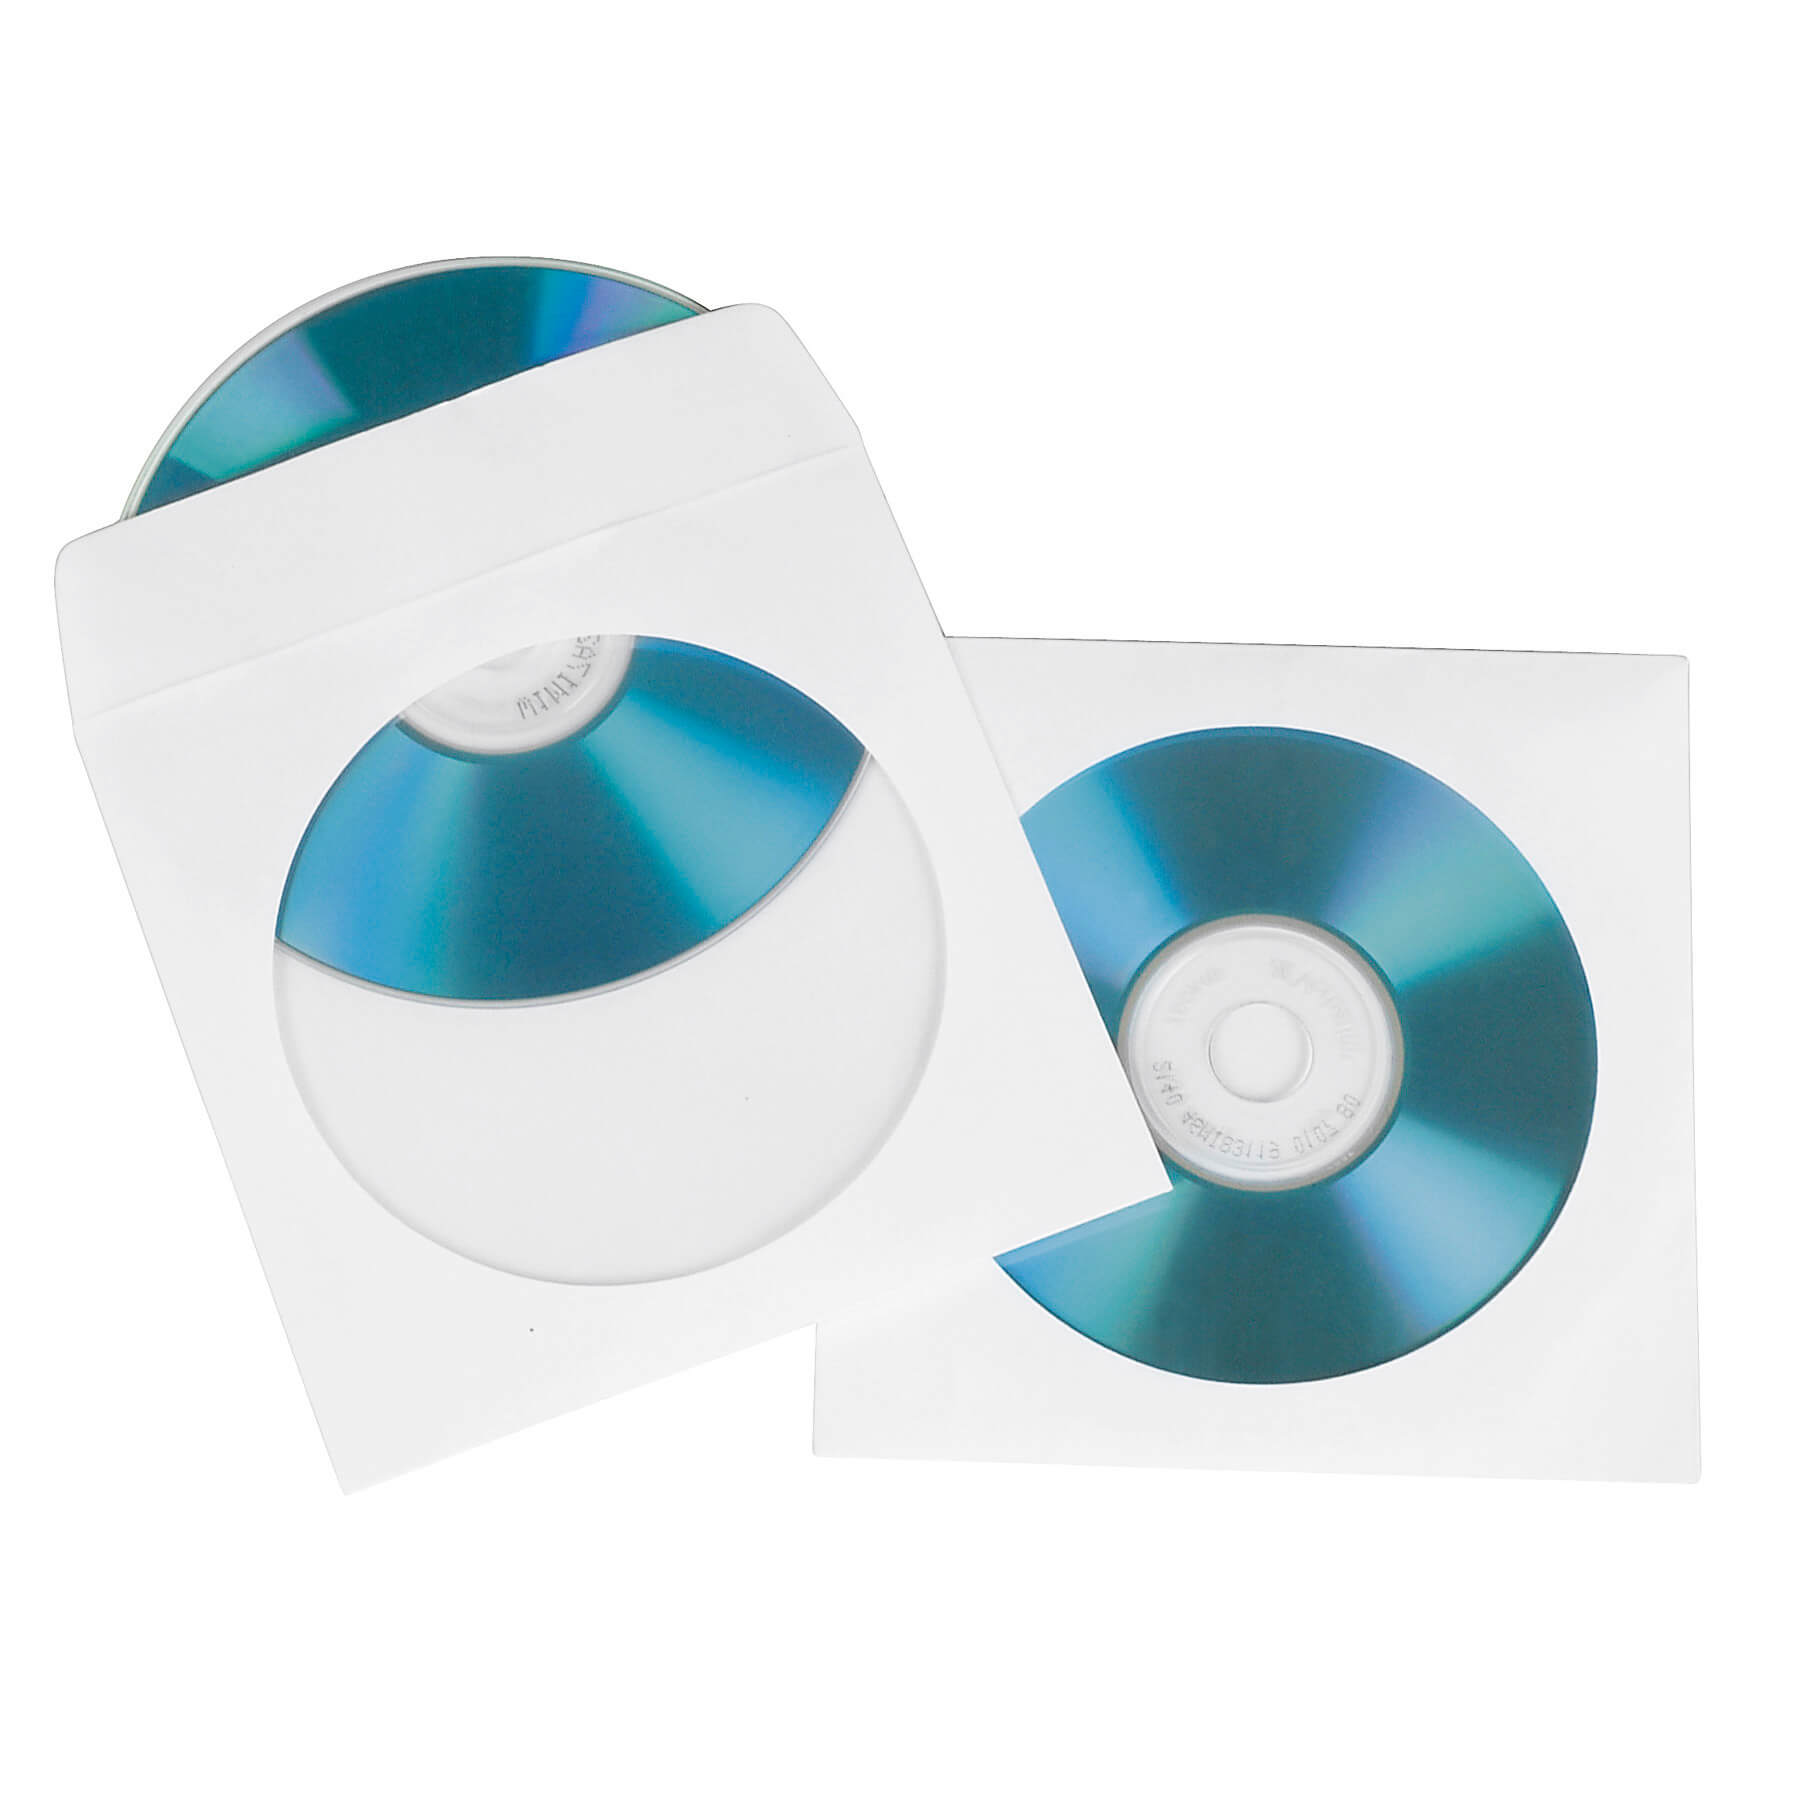 HAMA CD/DVD Protective Paper Sleev es, white, pack of 100